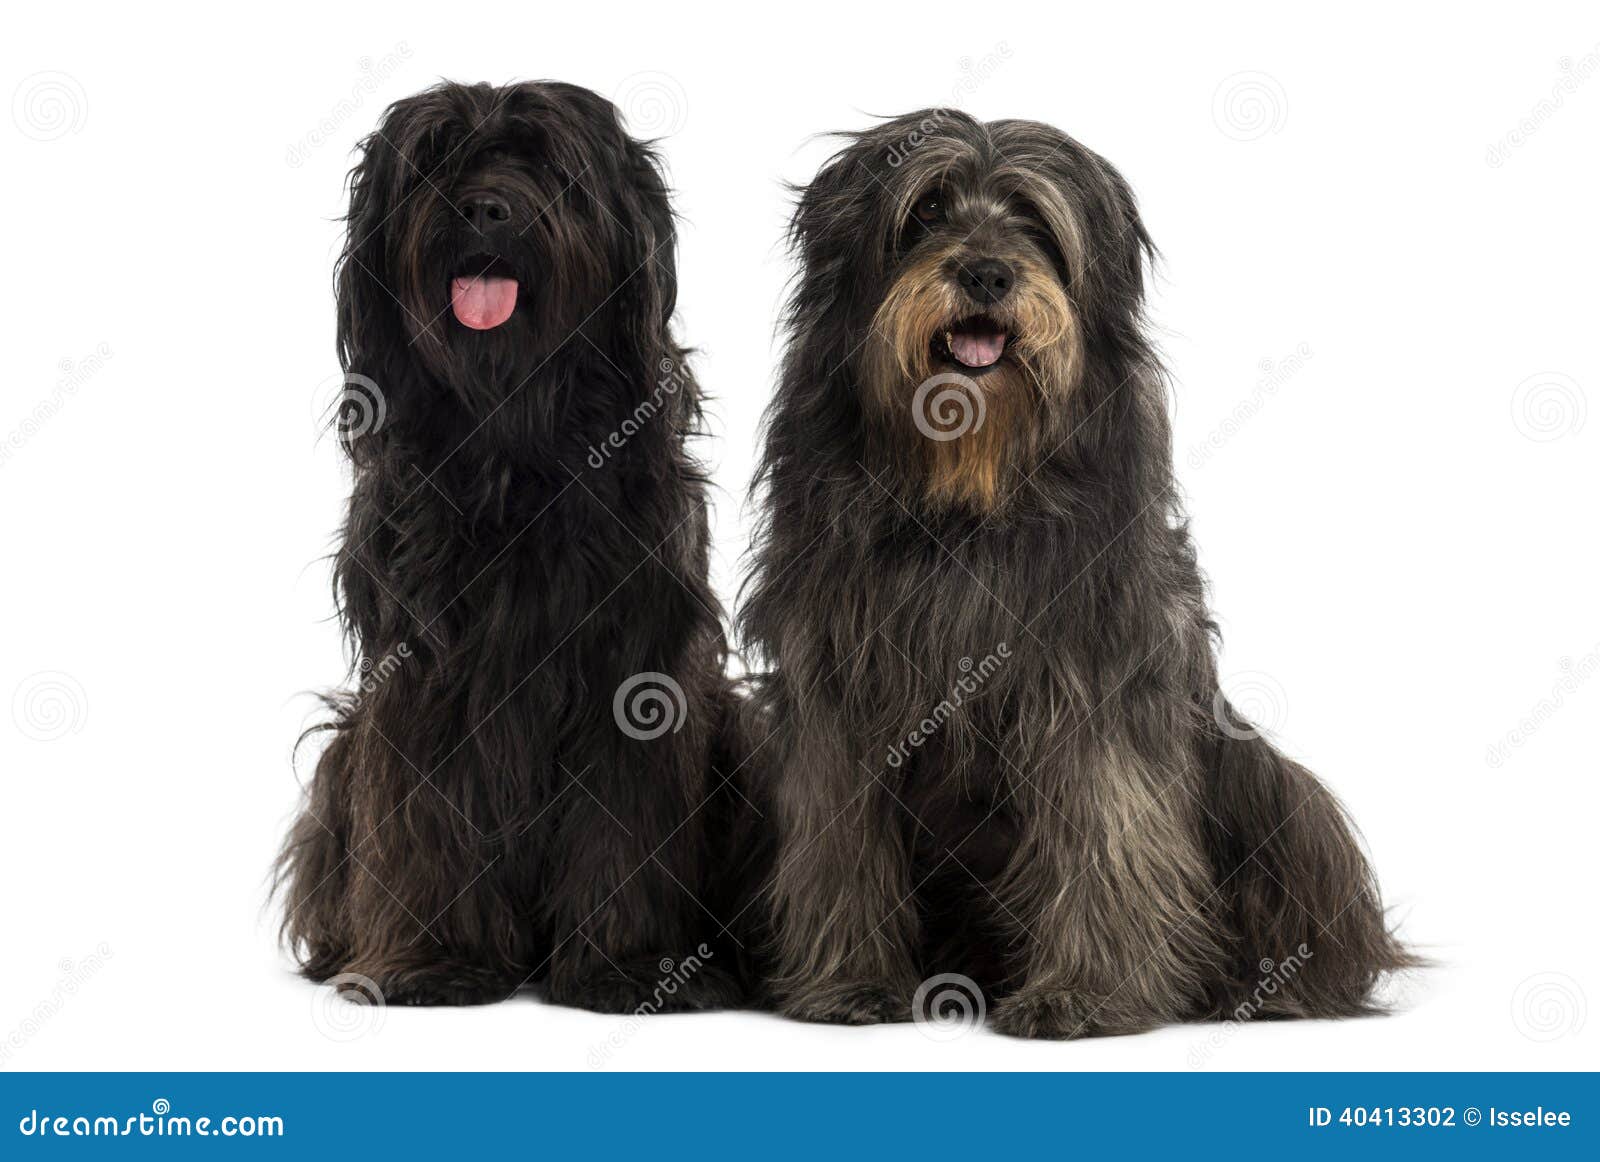 couple of catalan sheepdogs together, panting